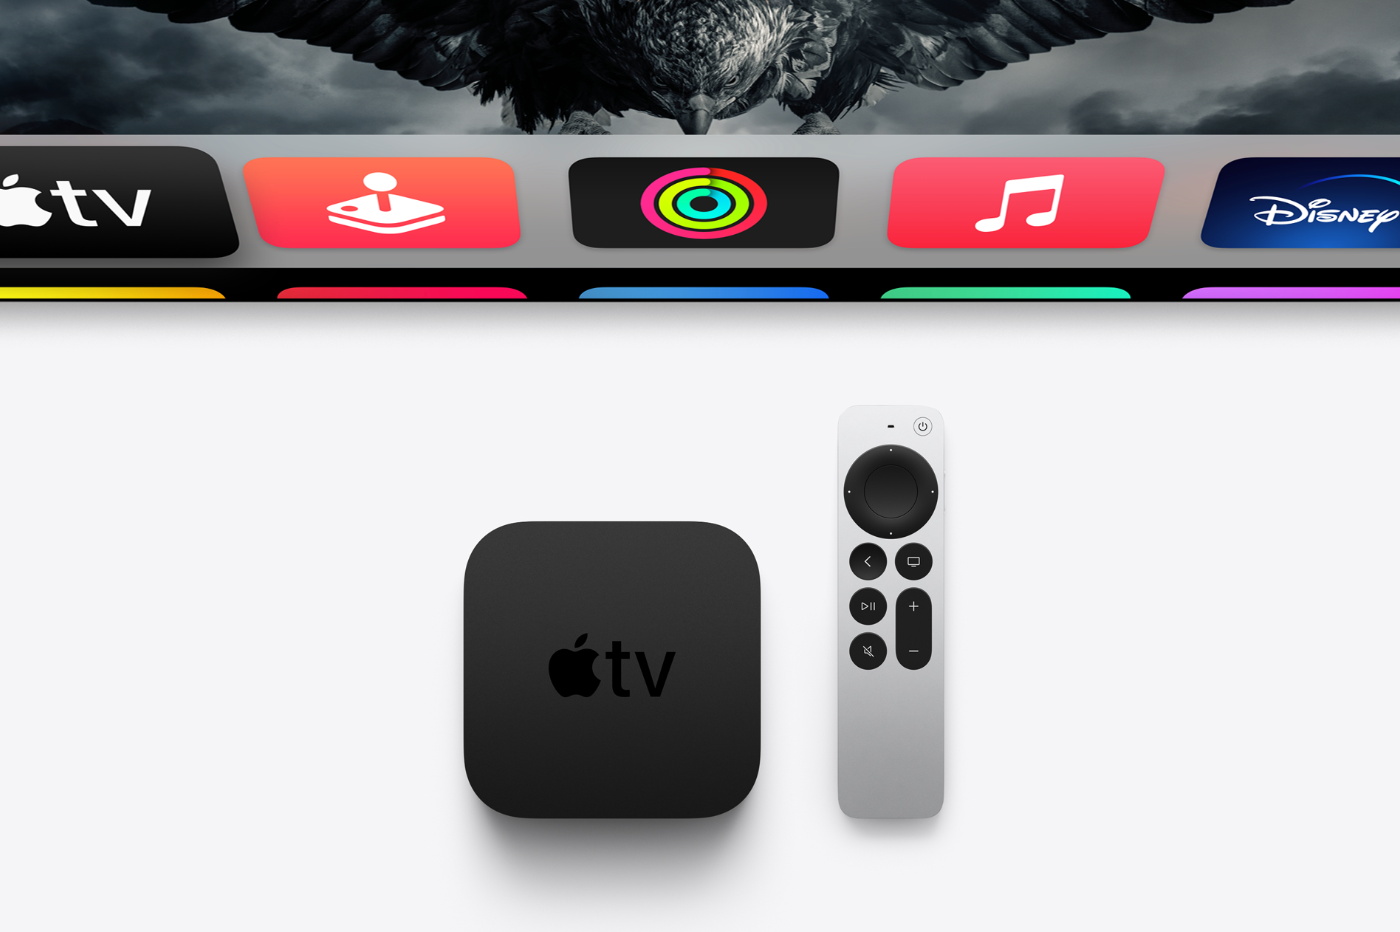 For Apple TV’s spatial audio, Disney+ is now streaming with Dolby Atmos